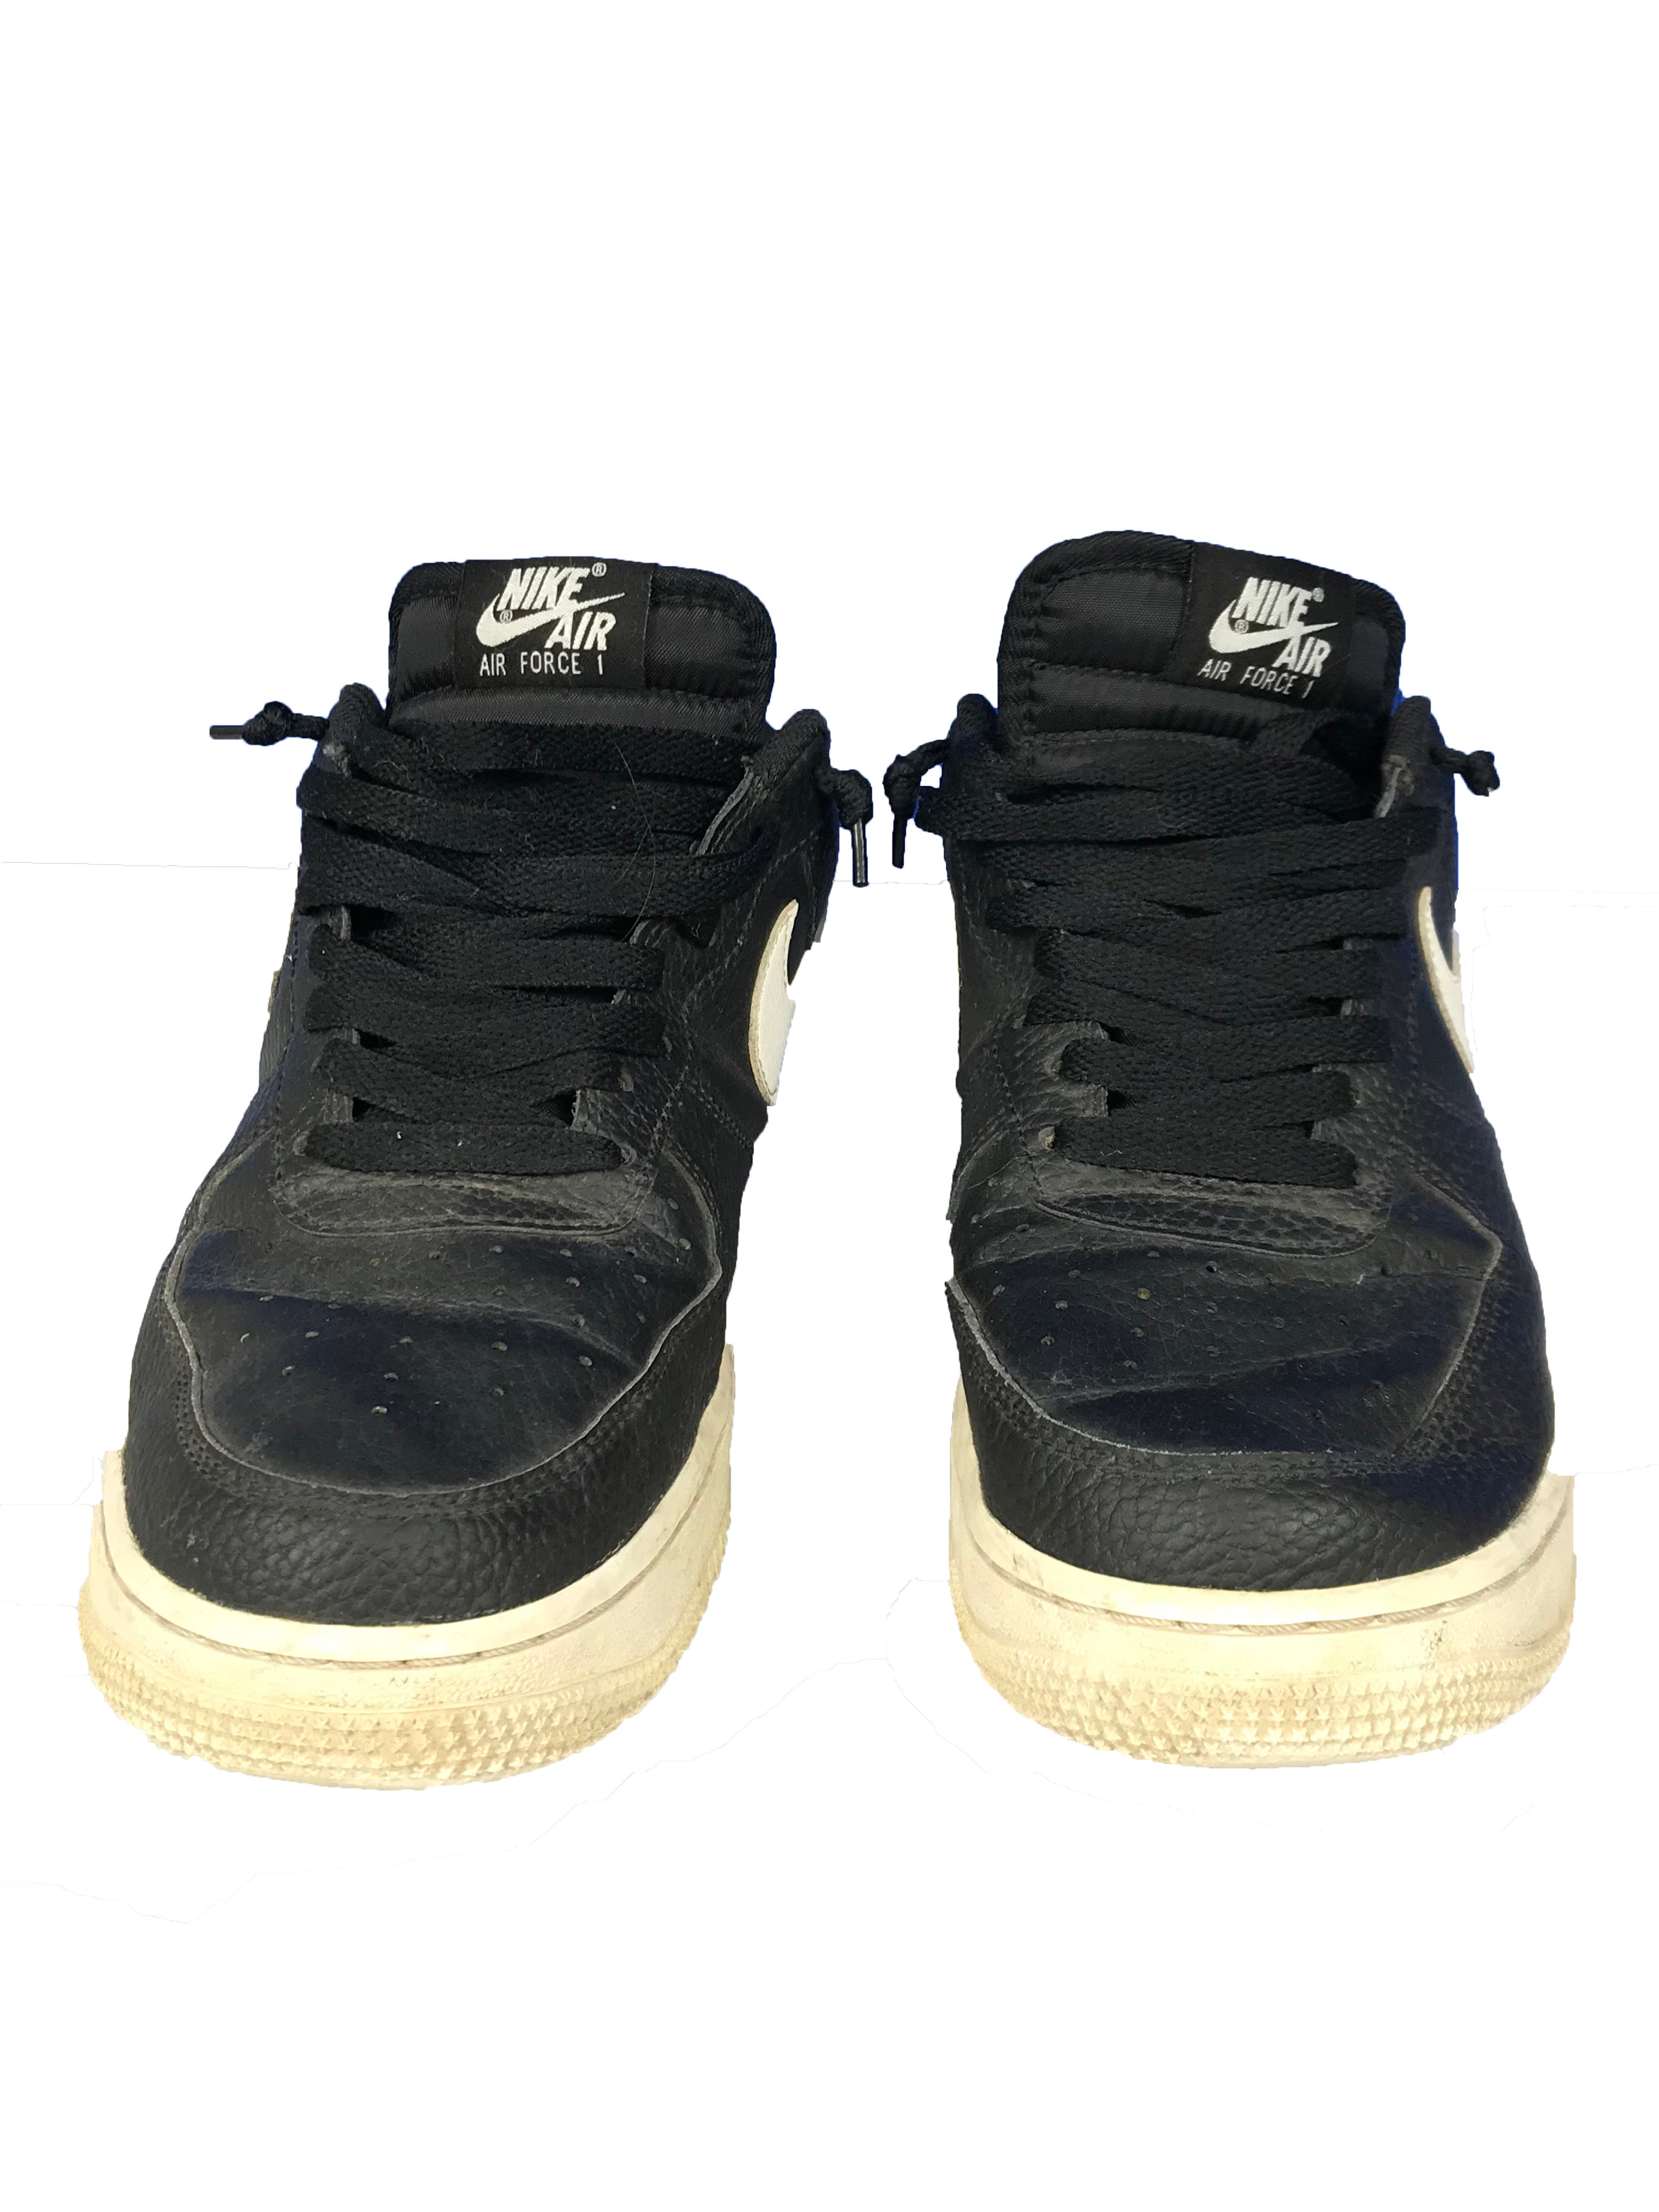 Nike Air Force 1 High Black Suede Gum bottoms shoes size 9